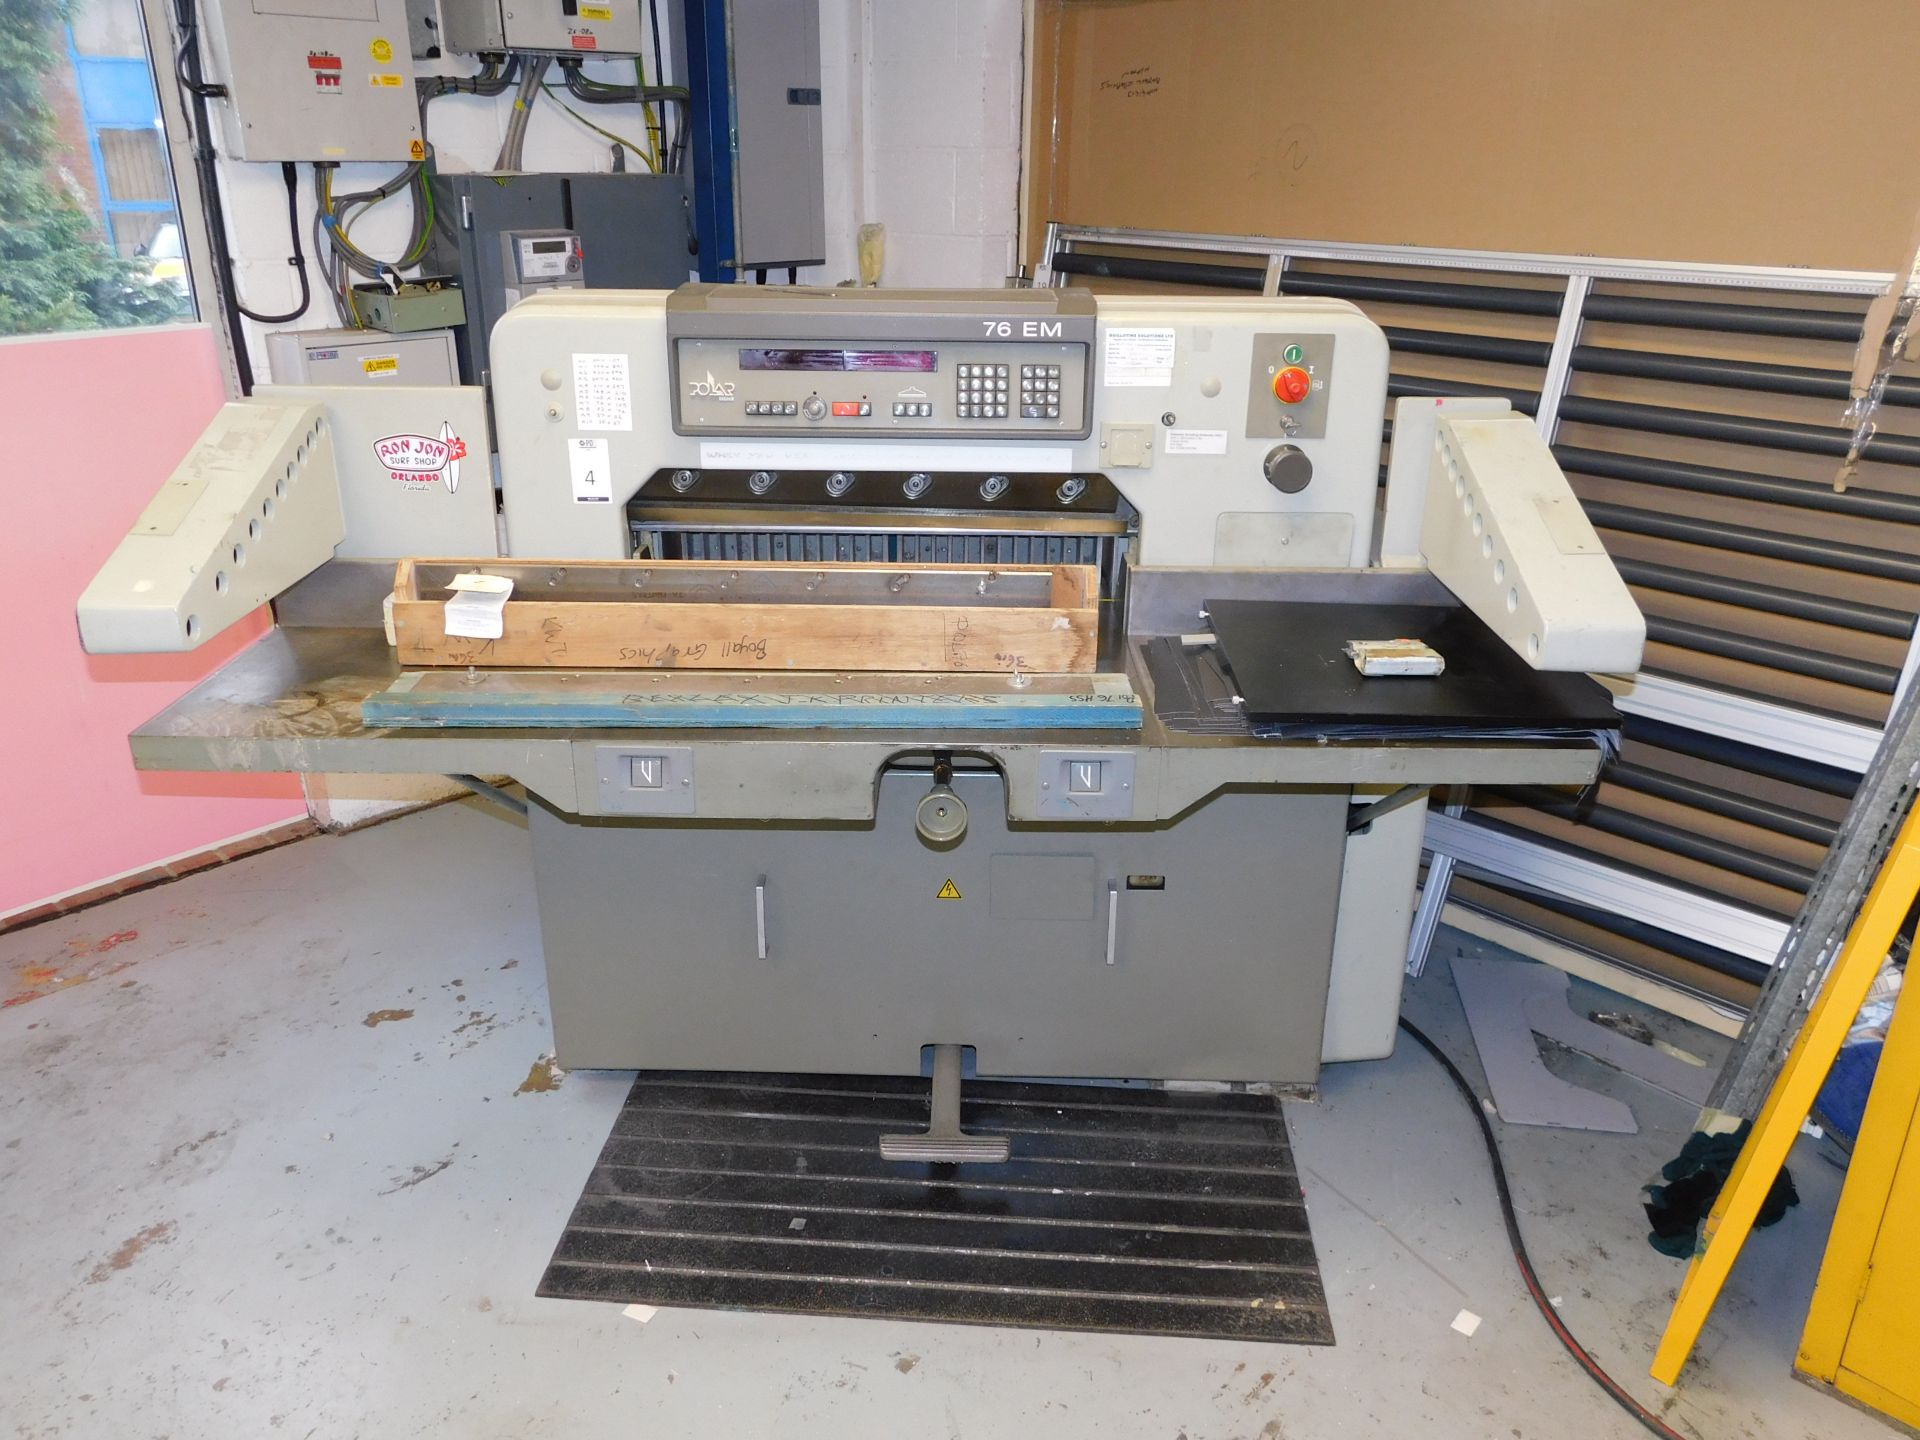 Polar 76EM Paper Guillotine, Serial Number 6461310 (1994) (To Be Collected Wednesday 27th November) - Image 10 of 11